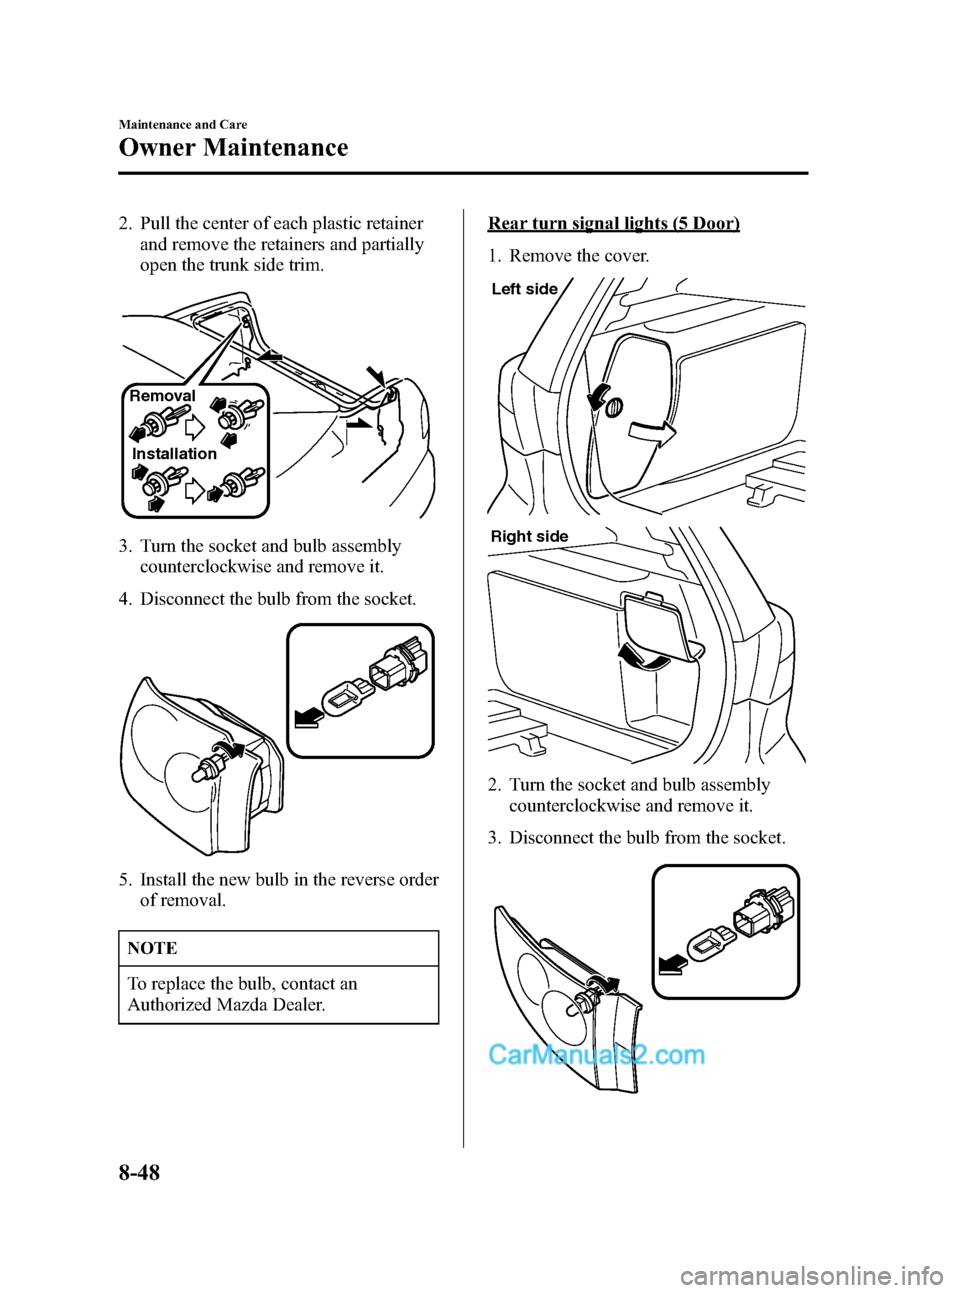 MAZDA MODEL MAZDASPEED 3 2007  Owners Manual (in English) Black plate (322,1)
2. Pull the center of each plastic retainer
and remove the retainers and partially
open the trunk side trim.
Removal
Installation
3. Turn the socket and bulb assembly
counterclockw